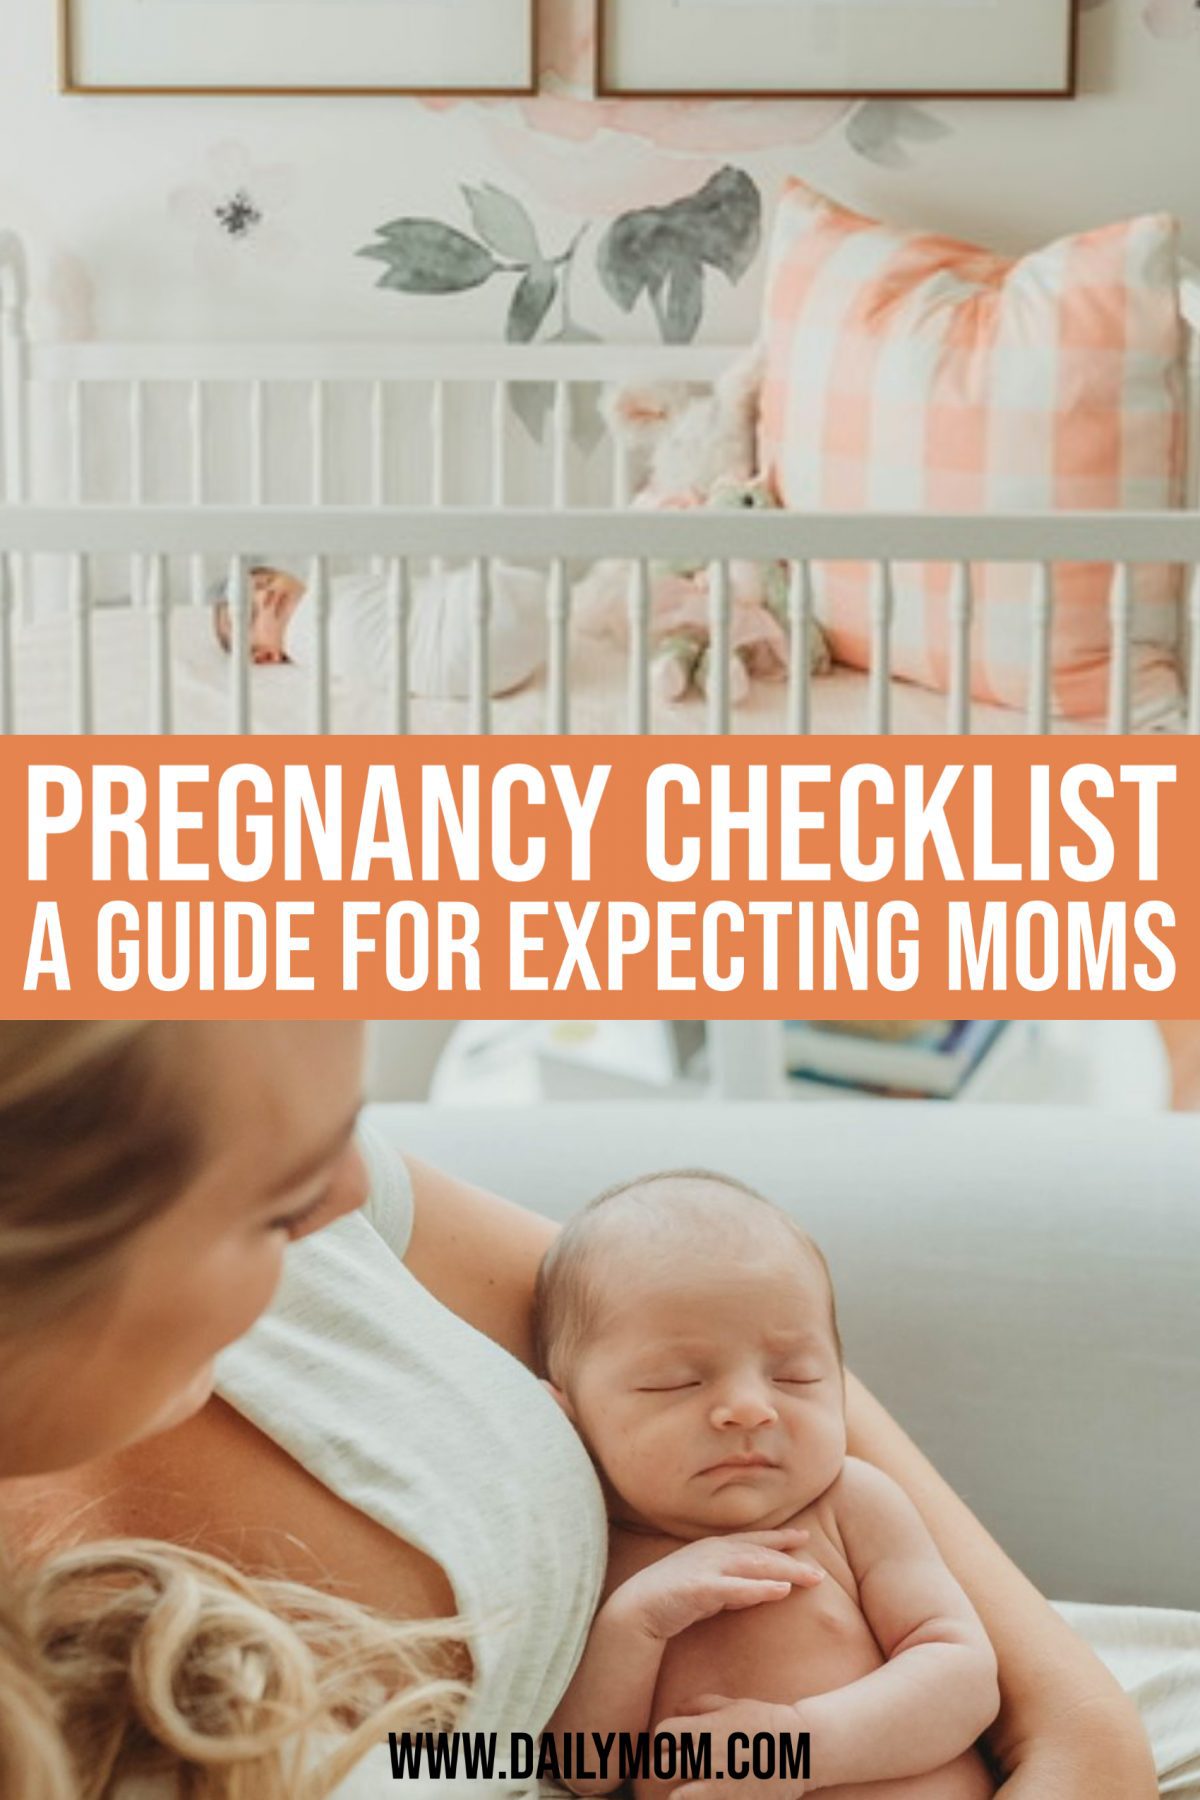 Pregnancy Checklist: A Guide For Expecting Moms